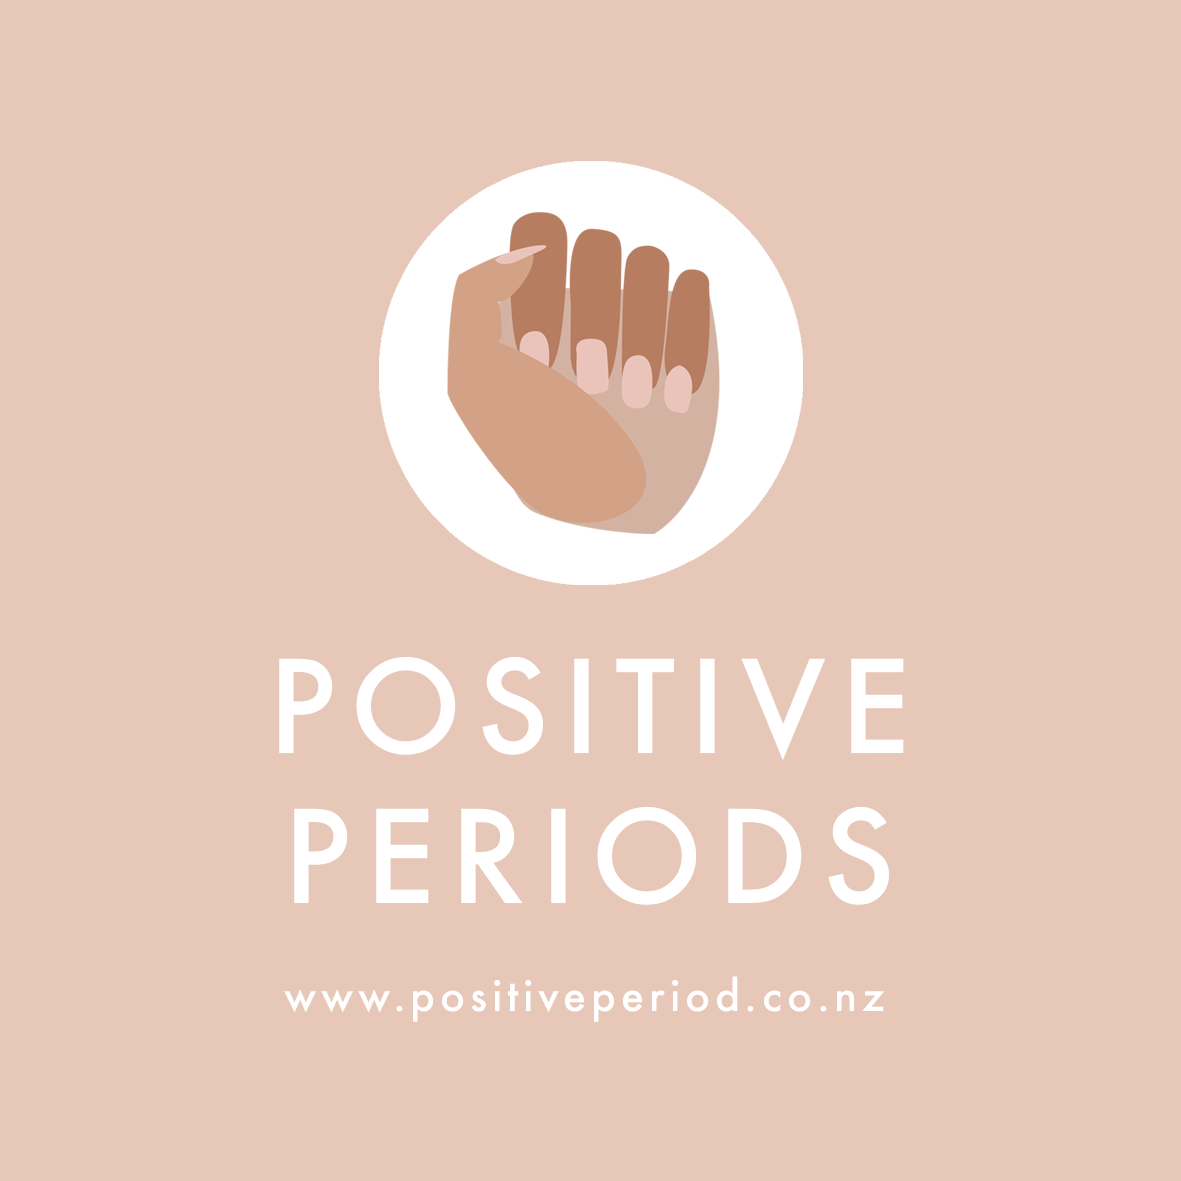 Positive Periods: The launch of a campaign for free sanitary items in New Zealand